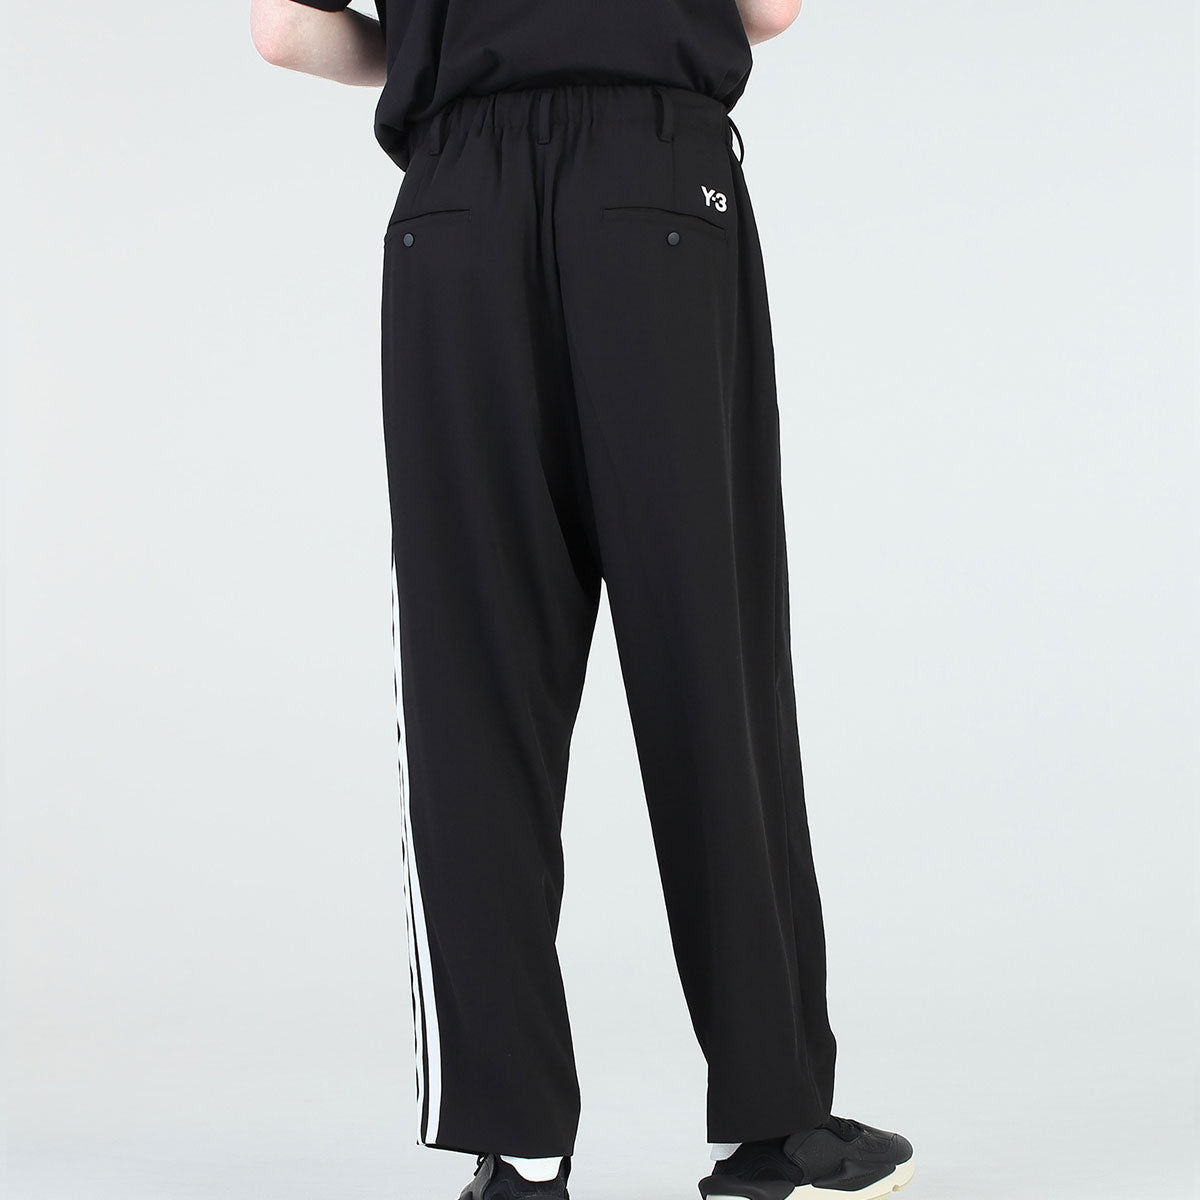 M CH1 ELEGANT 3 STP PANTS - Why are you here?